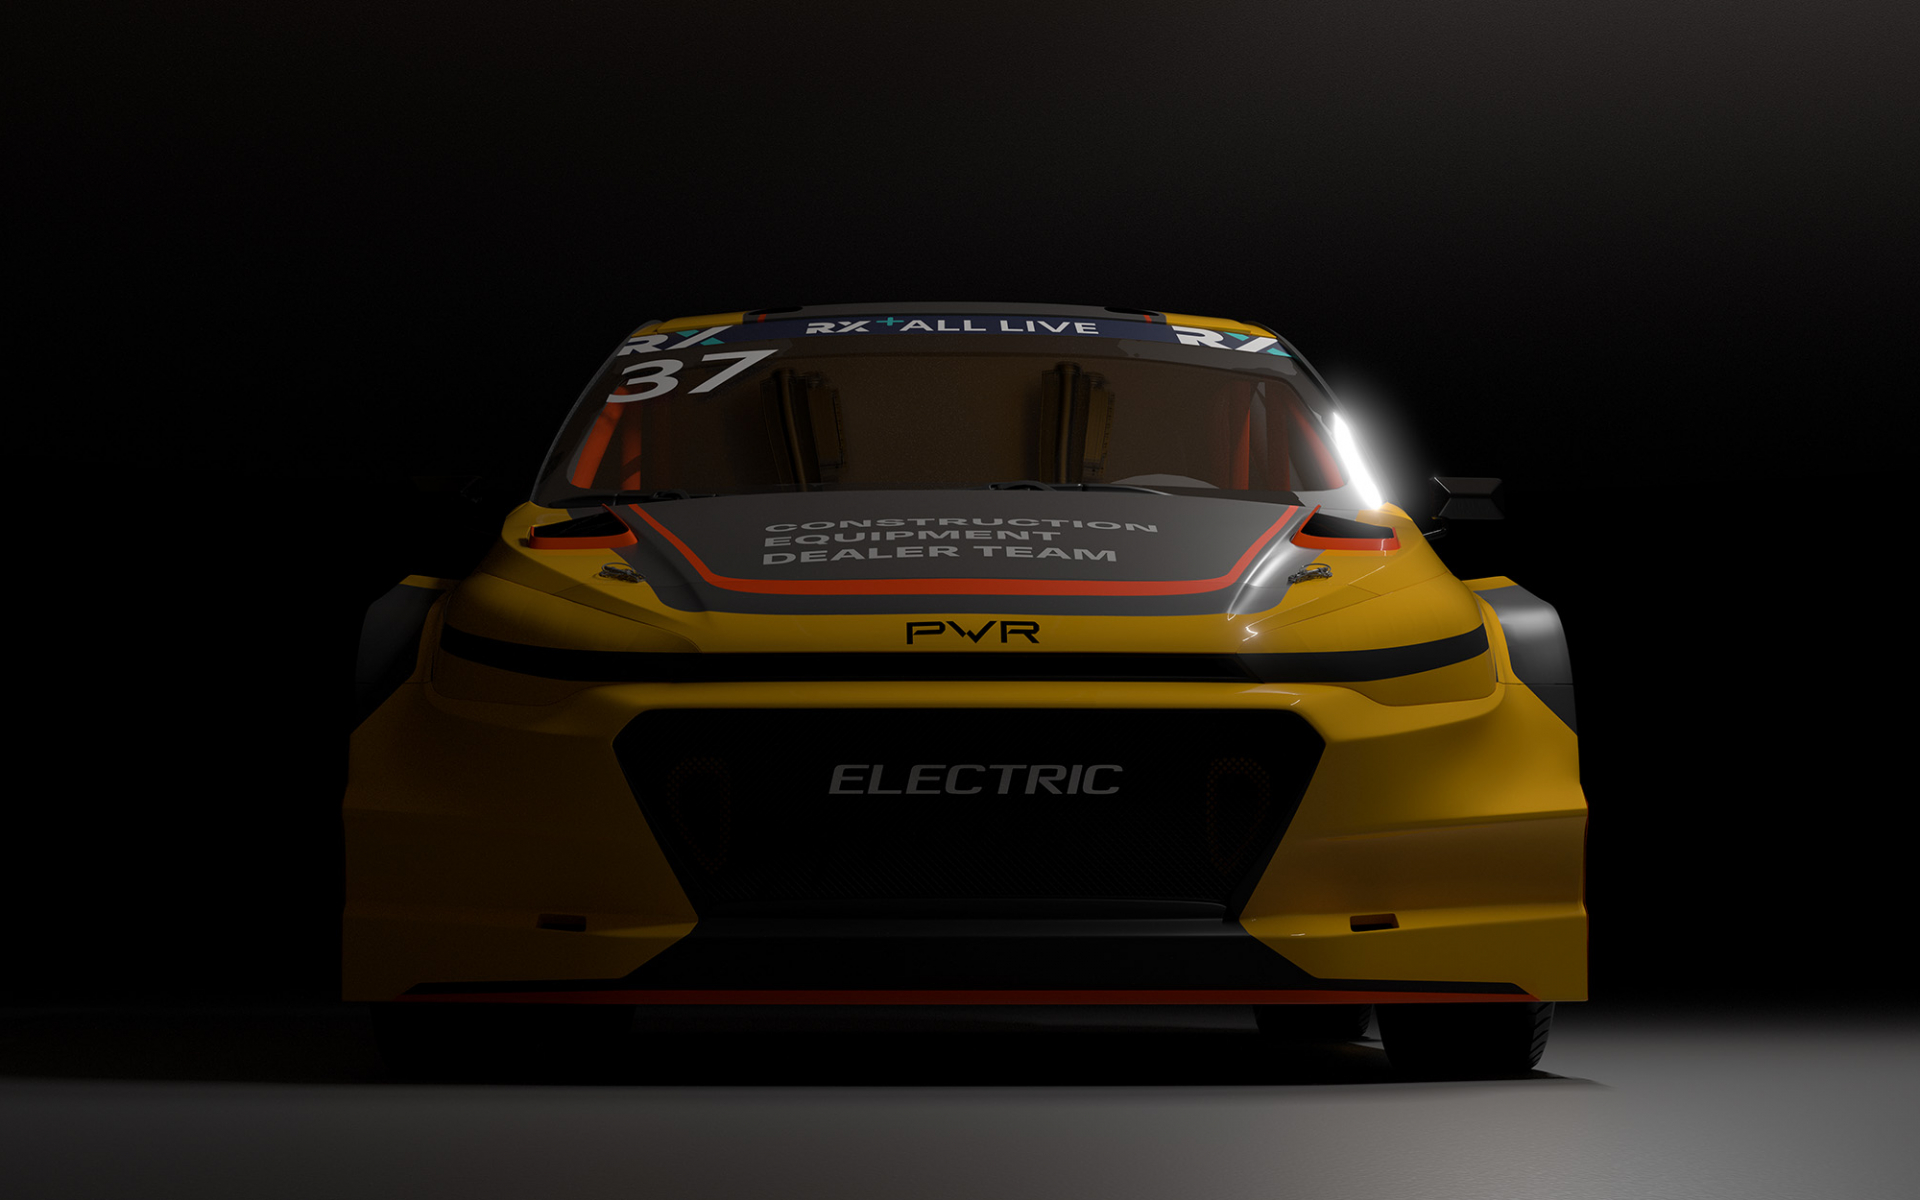 engcon becomes partner in electric venture in World Rallycross Championship